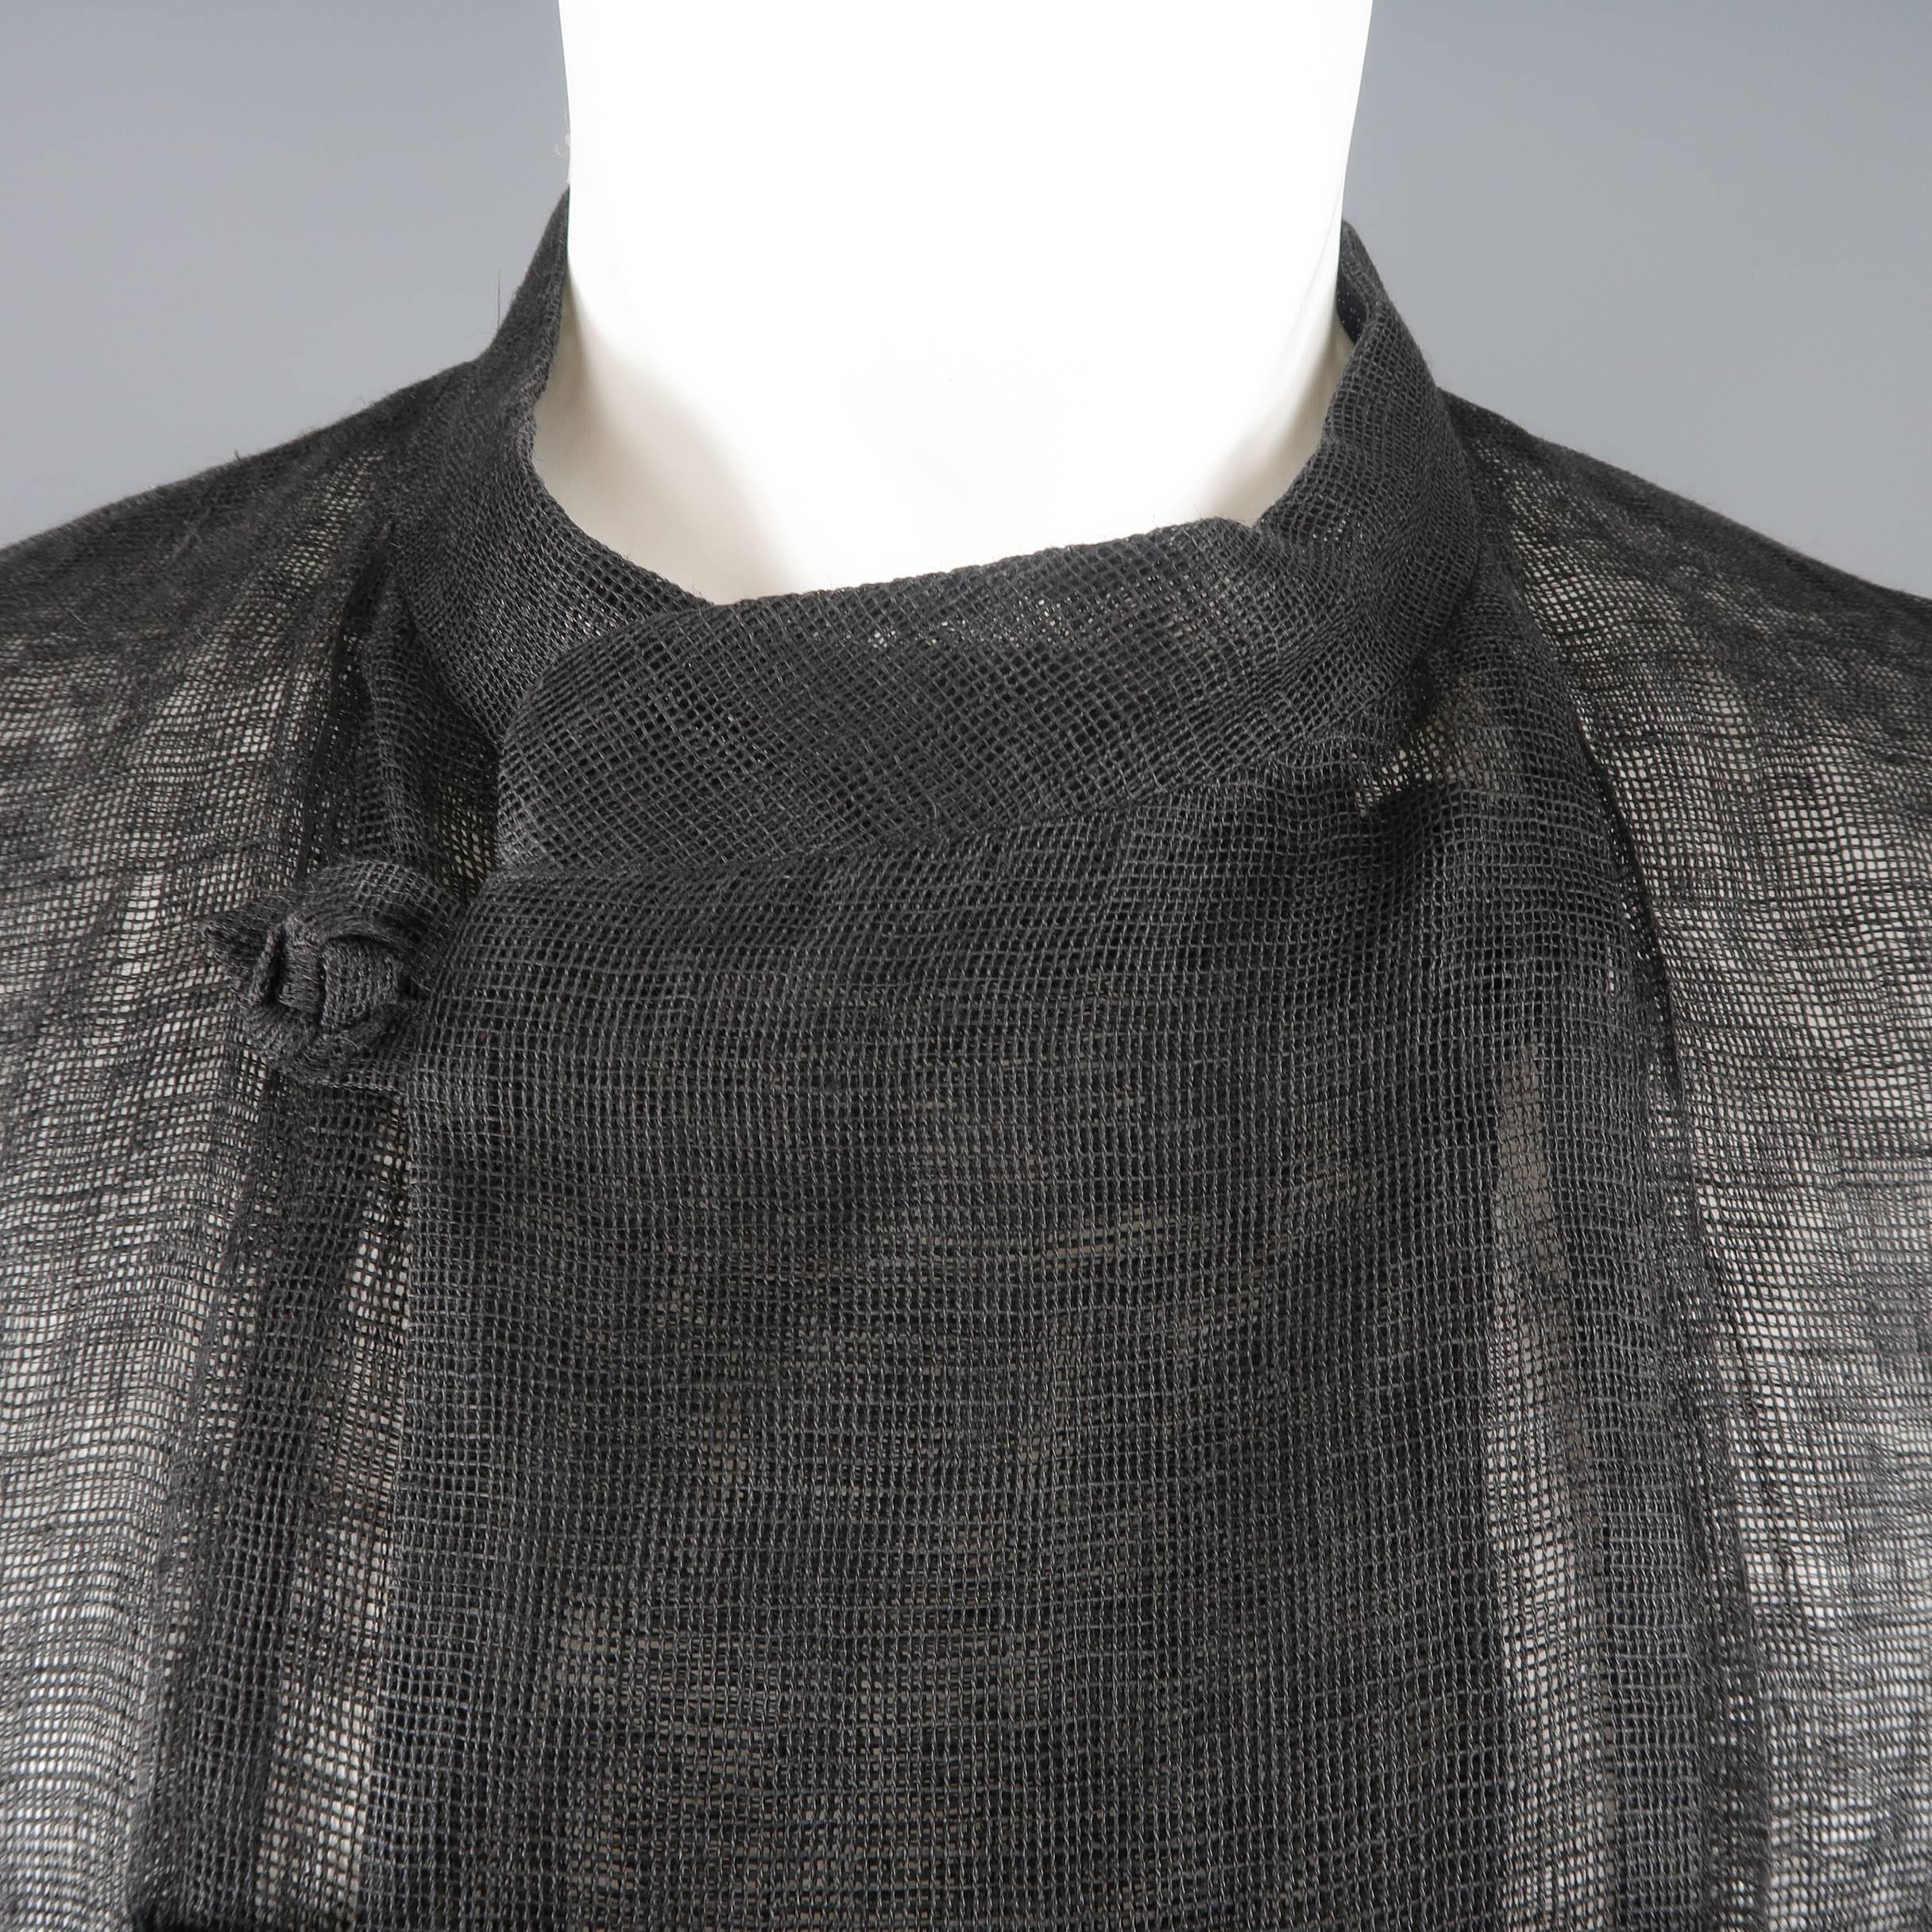 Vintage ISSEY MIYAKE jacket comes in woven linen mesh material with a band collar, double breasted toggle closure, oversized drop shoulder silhouette, and patch pockets. Made in Japan.
 
Good Pre-Owned Condition.
Marked: L
 
Measurements:
